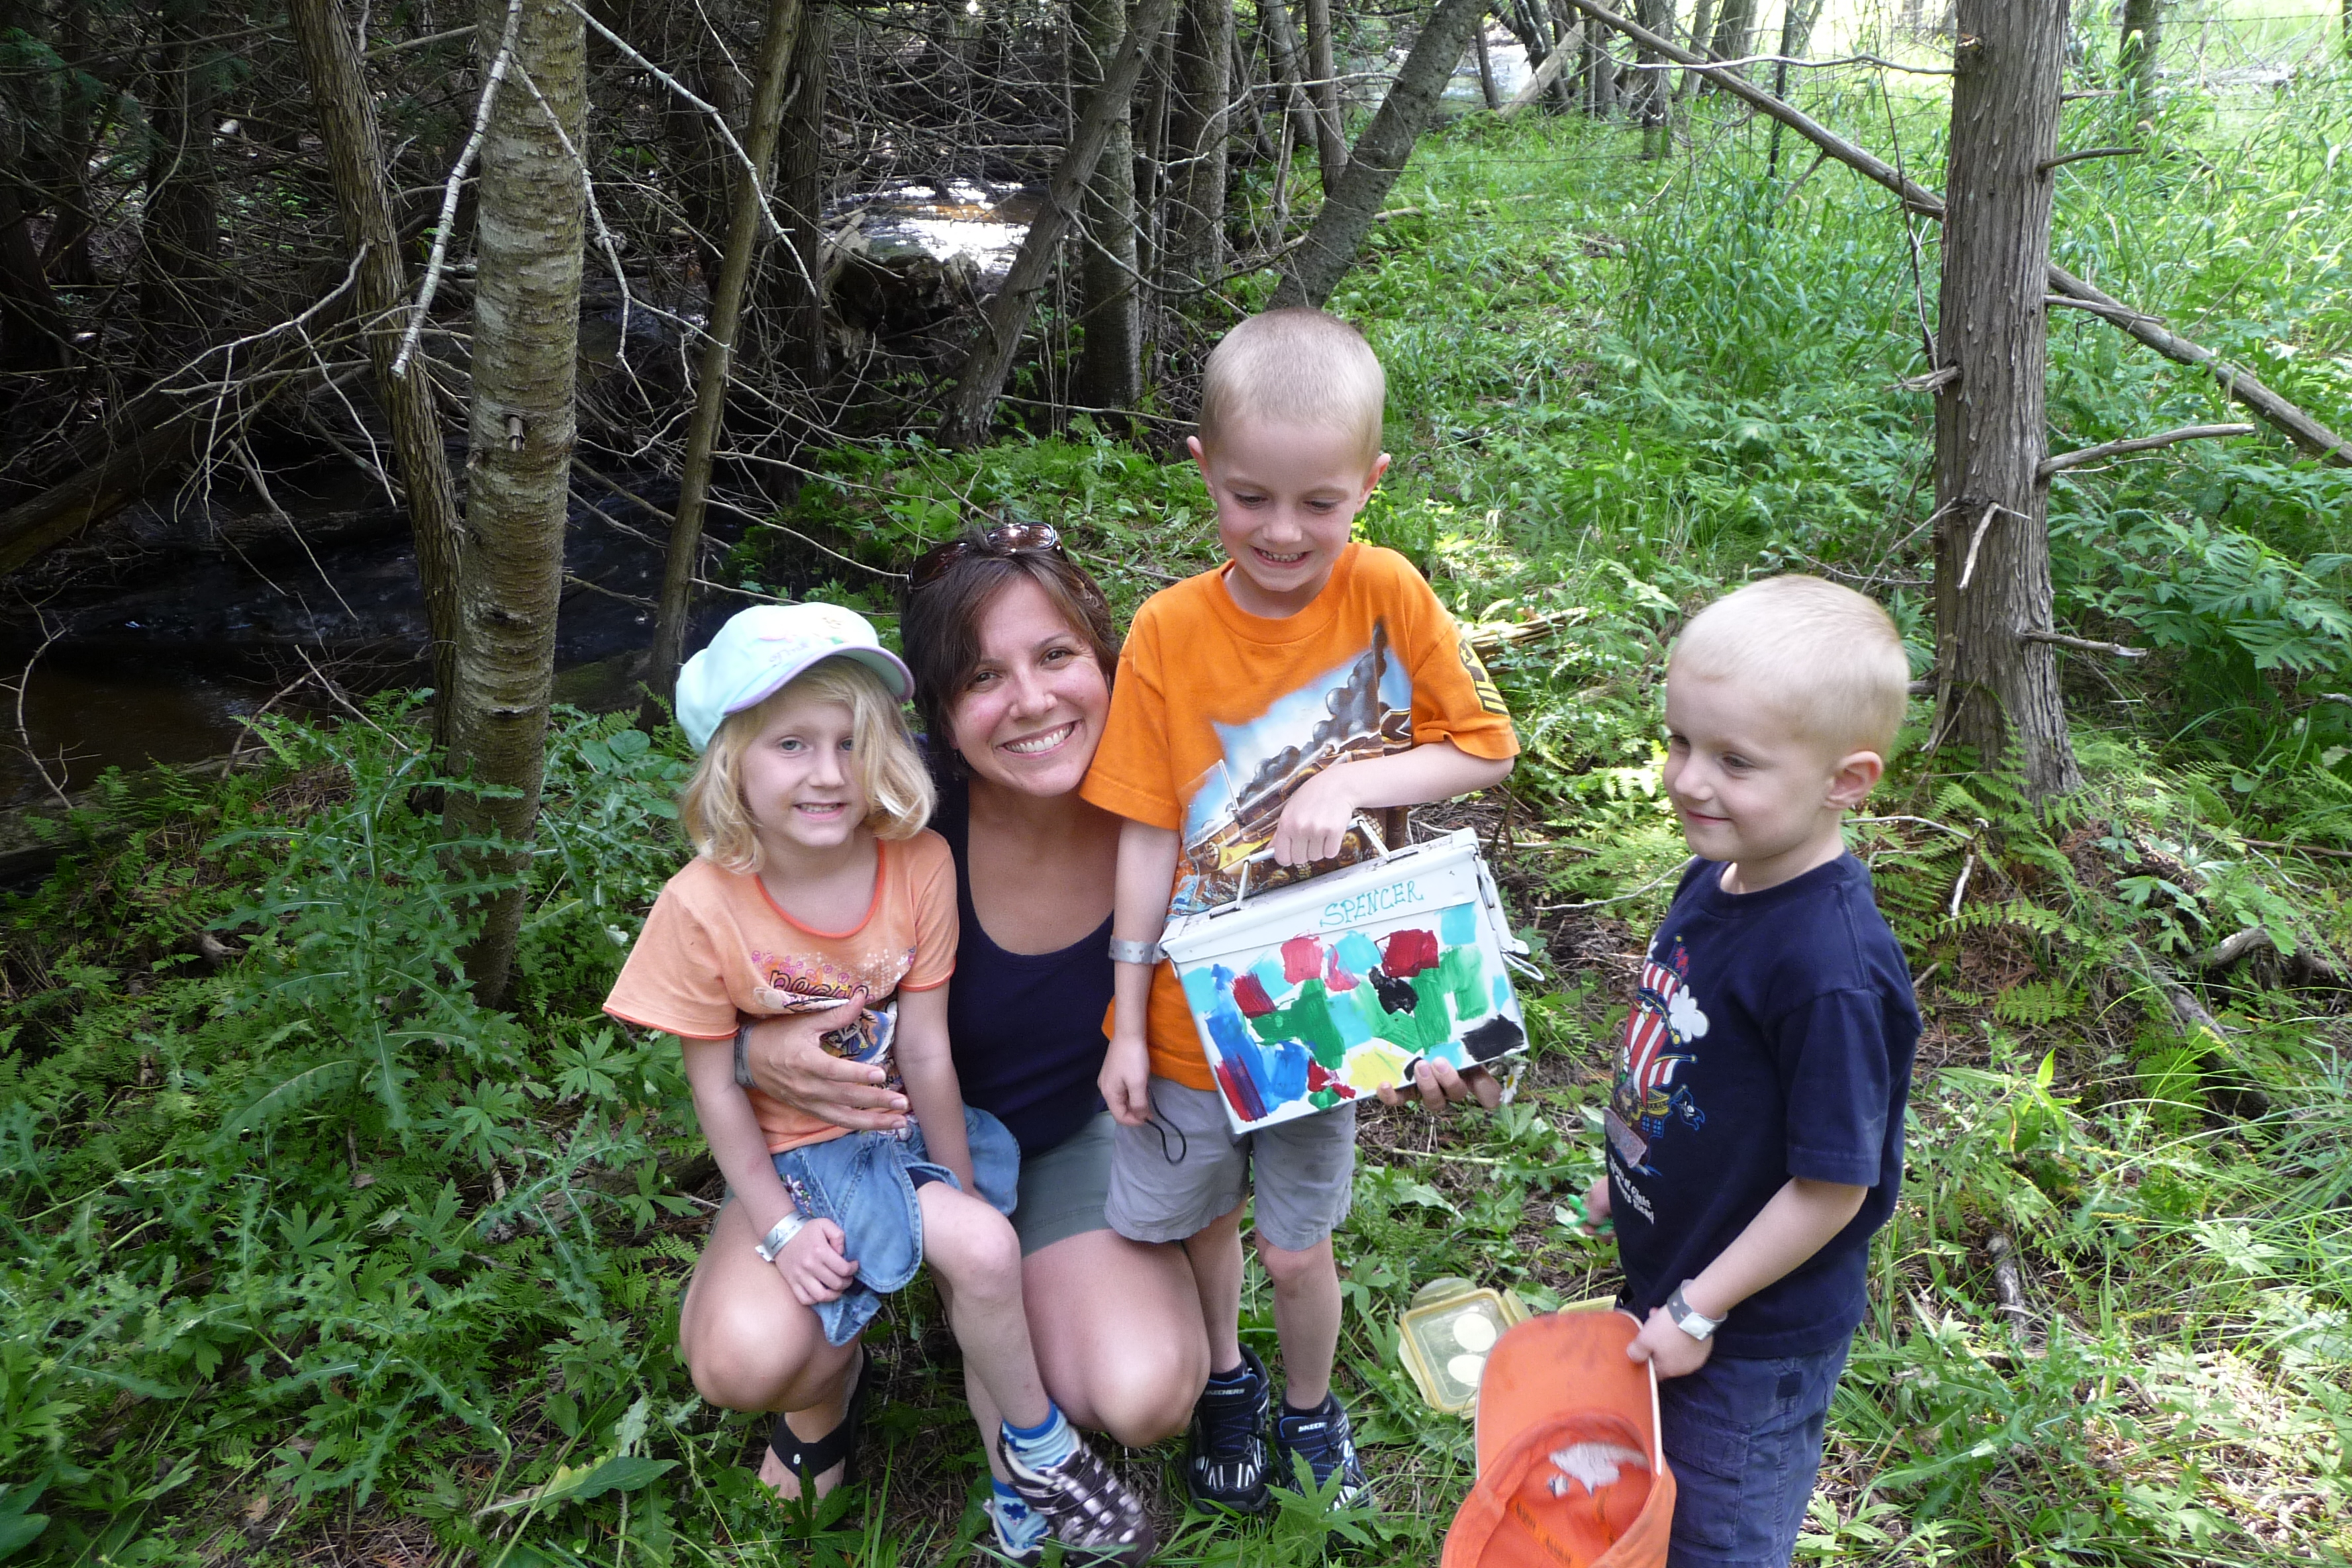 Here are Julie's children and a family friend enjoying a geocache adventure